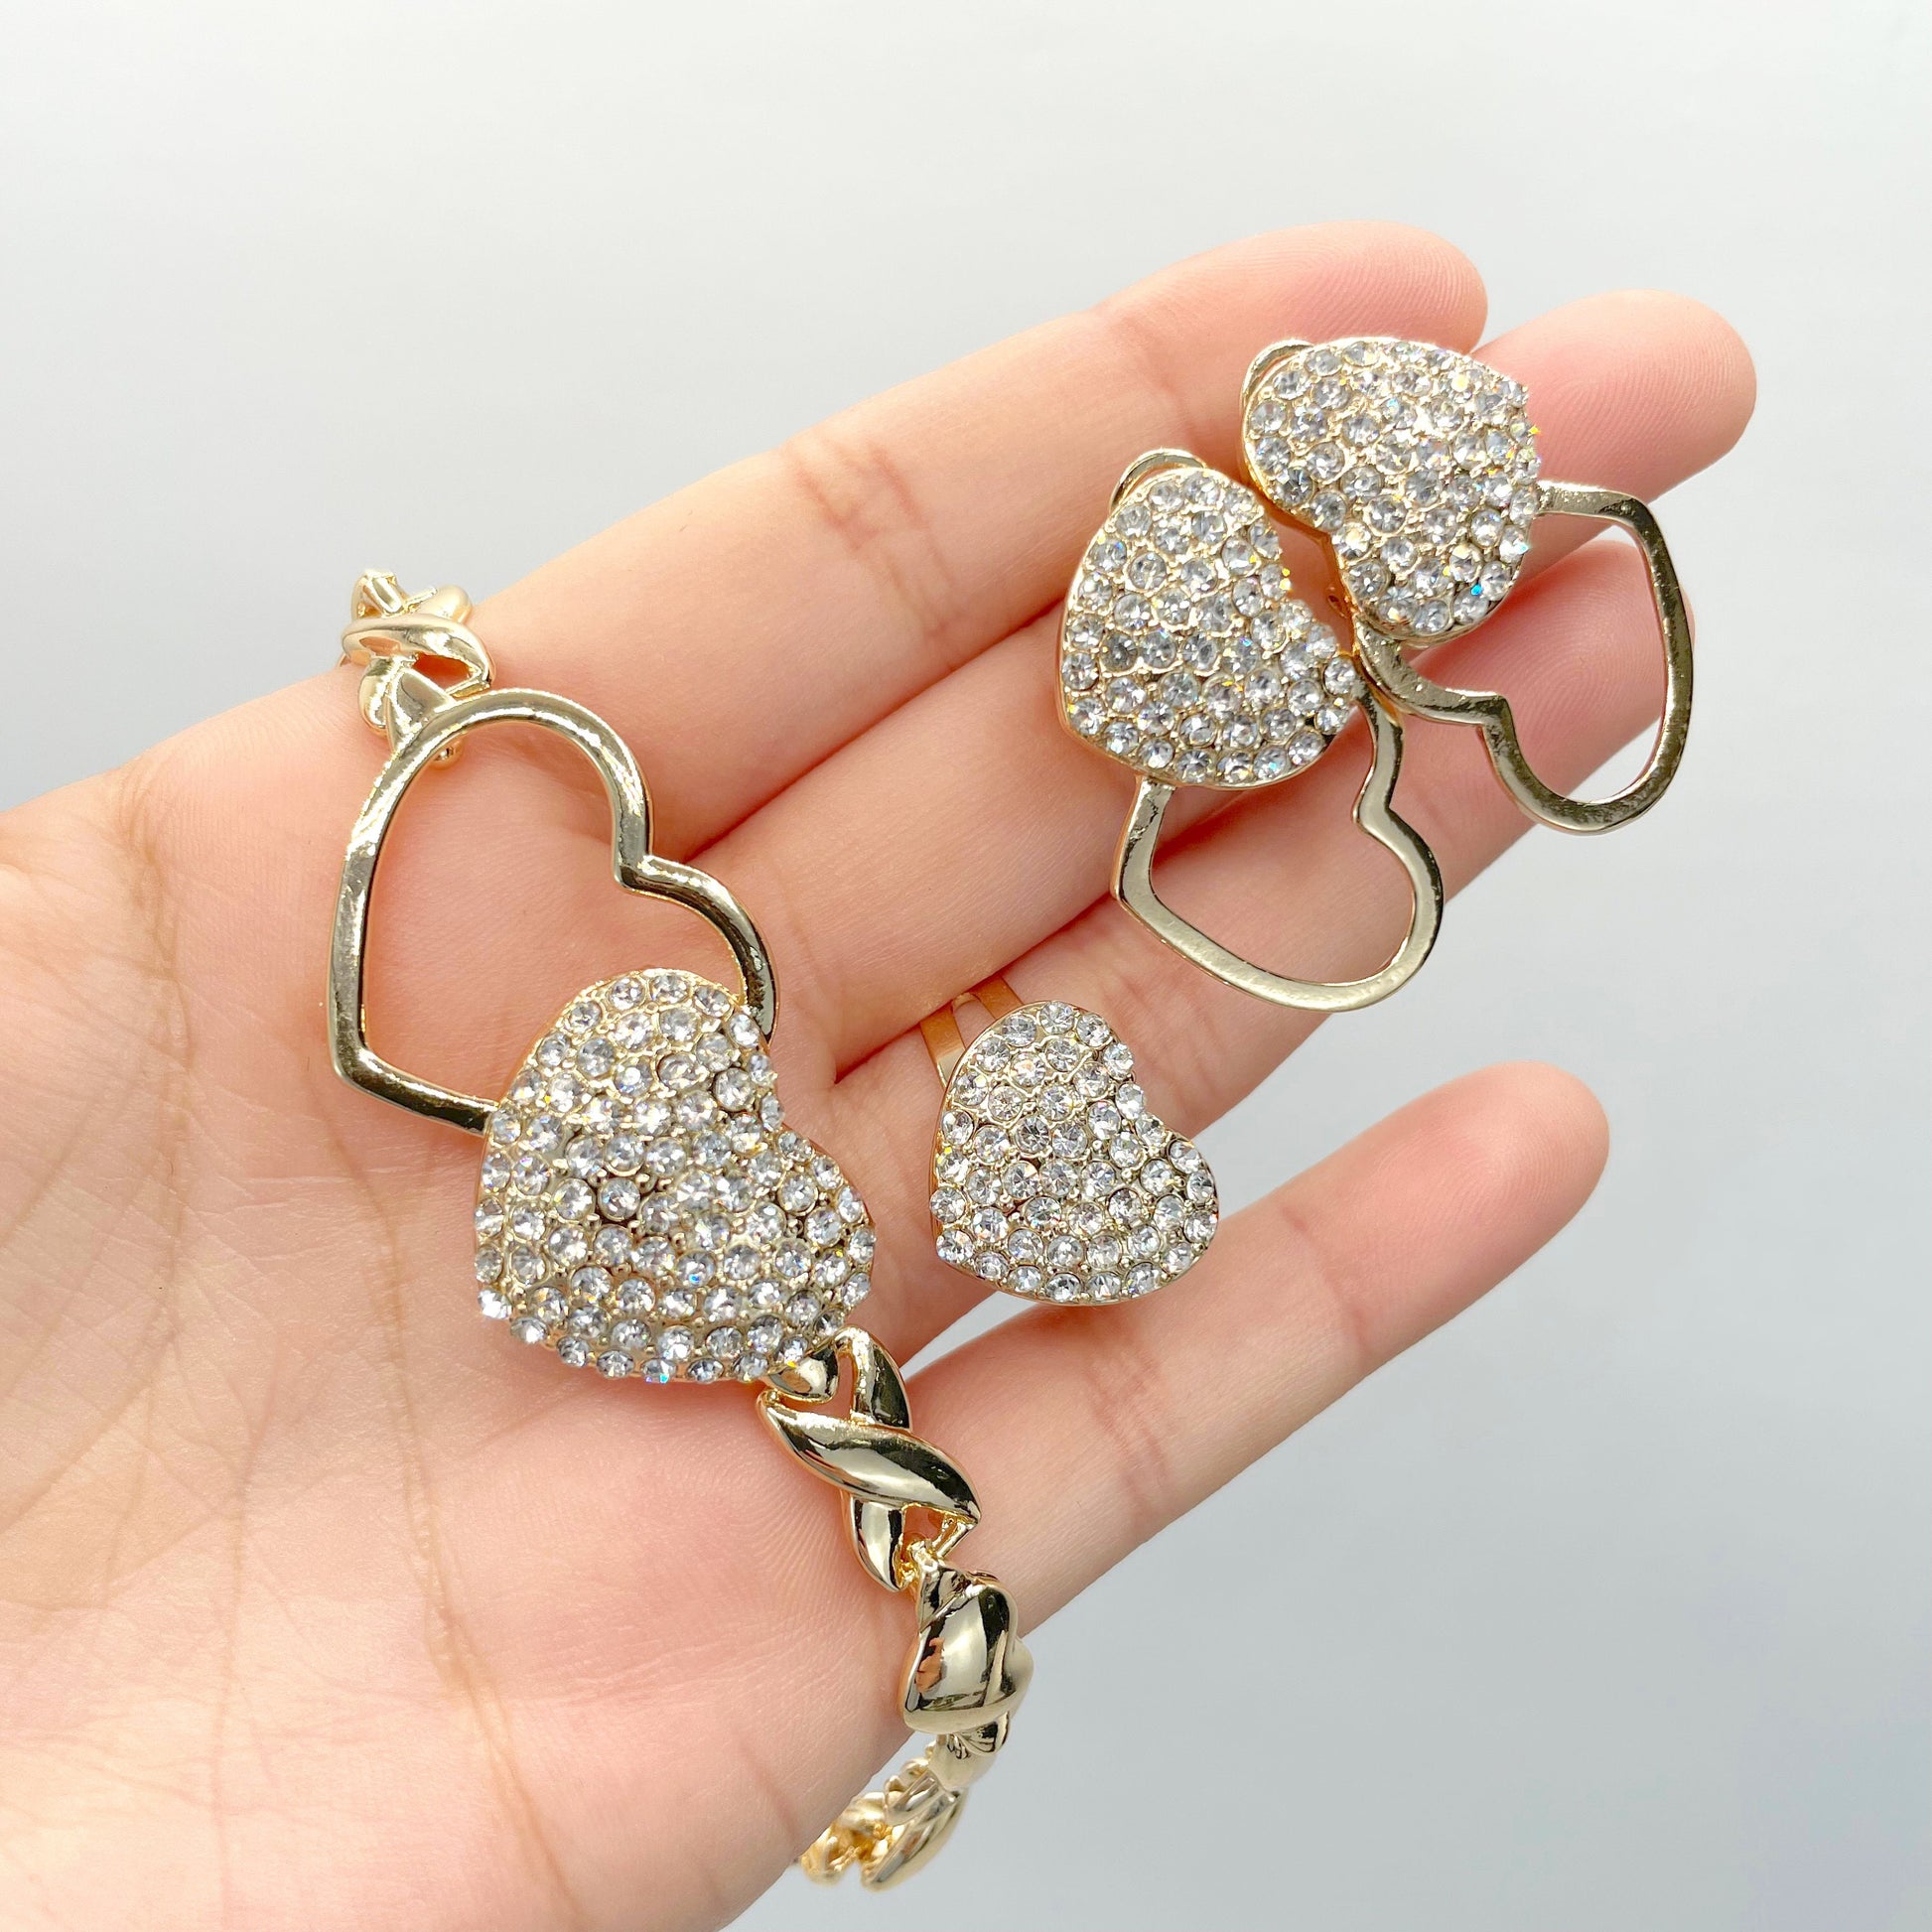 18k Gold Filled Double Hearts with Cubic Zirconia, XoXo Hug and Kisses Shape Set, 04 Pieces, Wholesale Jewelry Making Supplies